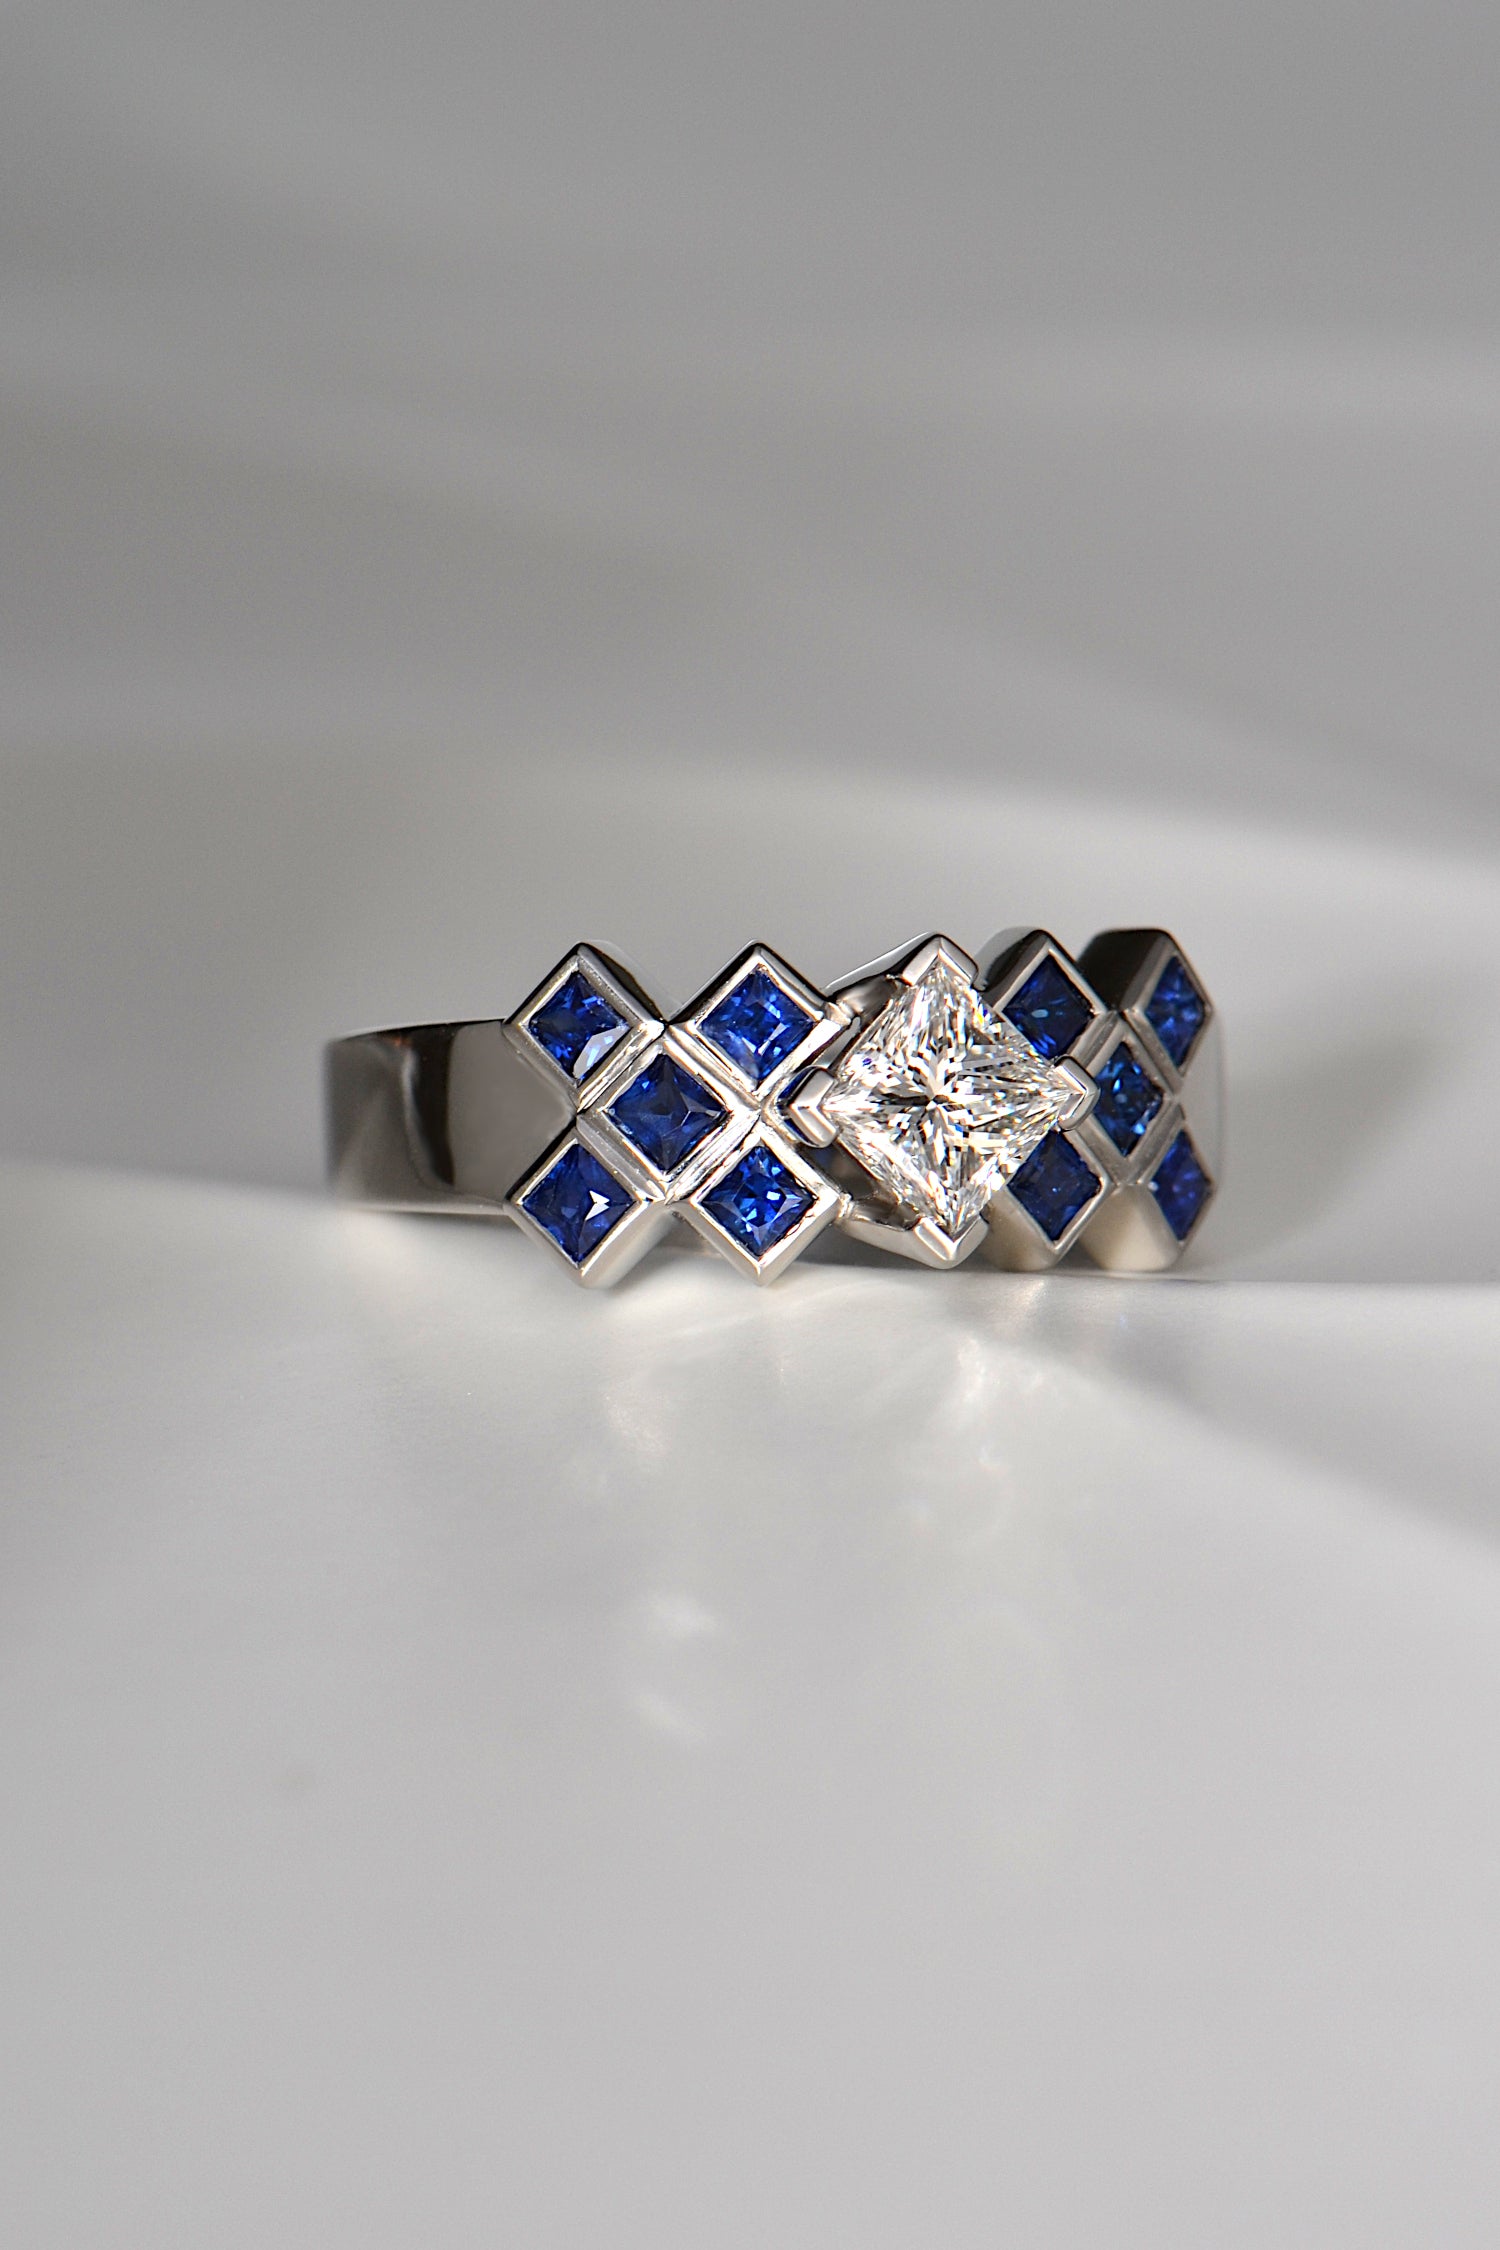 A large centre princess cut white diamond is set above a sea of square cut blue sapphires in a platinum engagement ring. There are ten sapphires in total, five on either side of the princess cut central diamond.